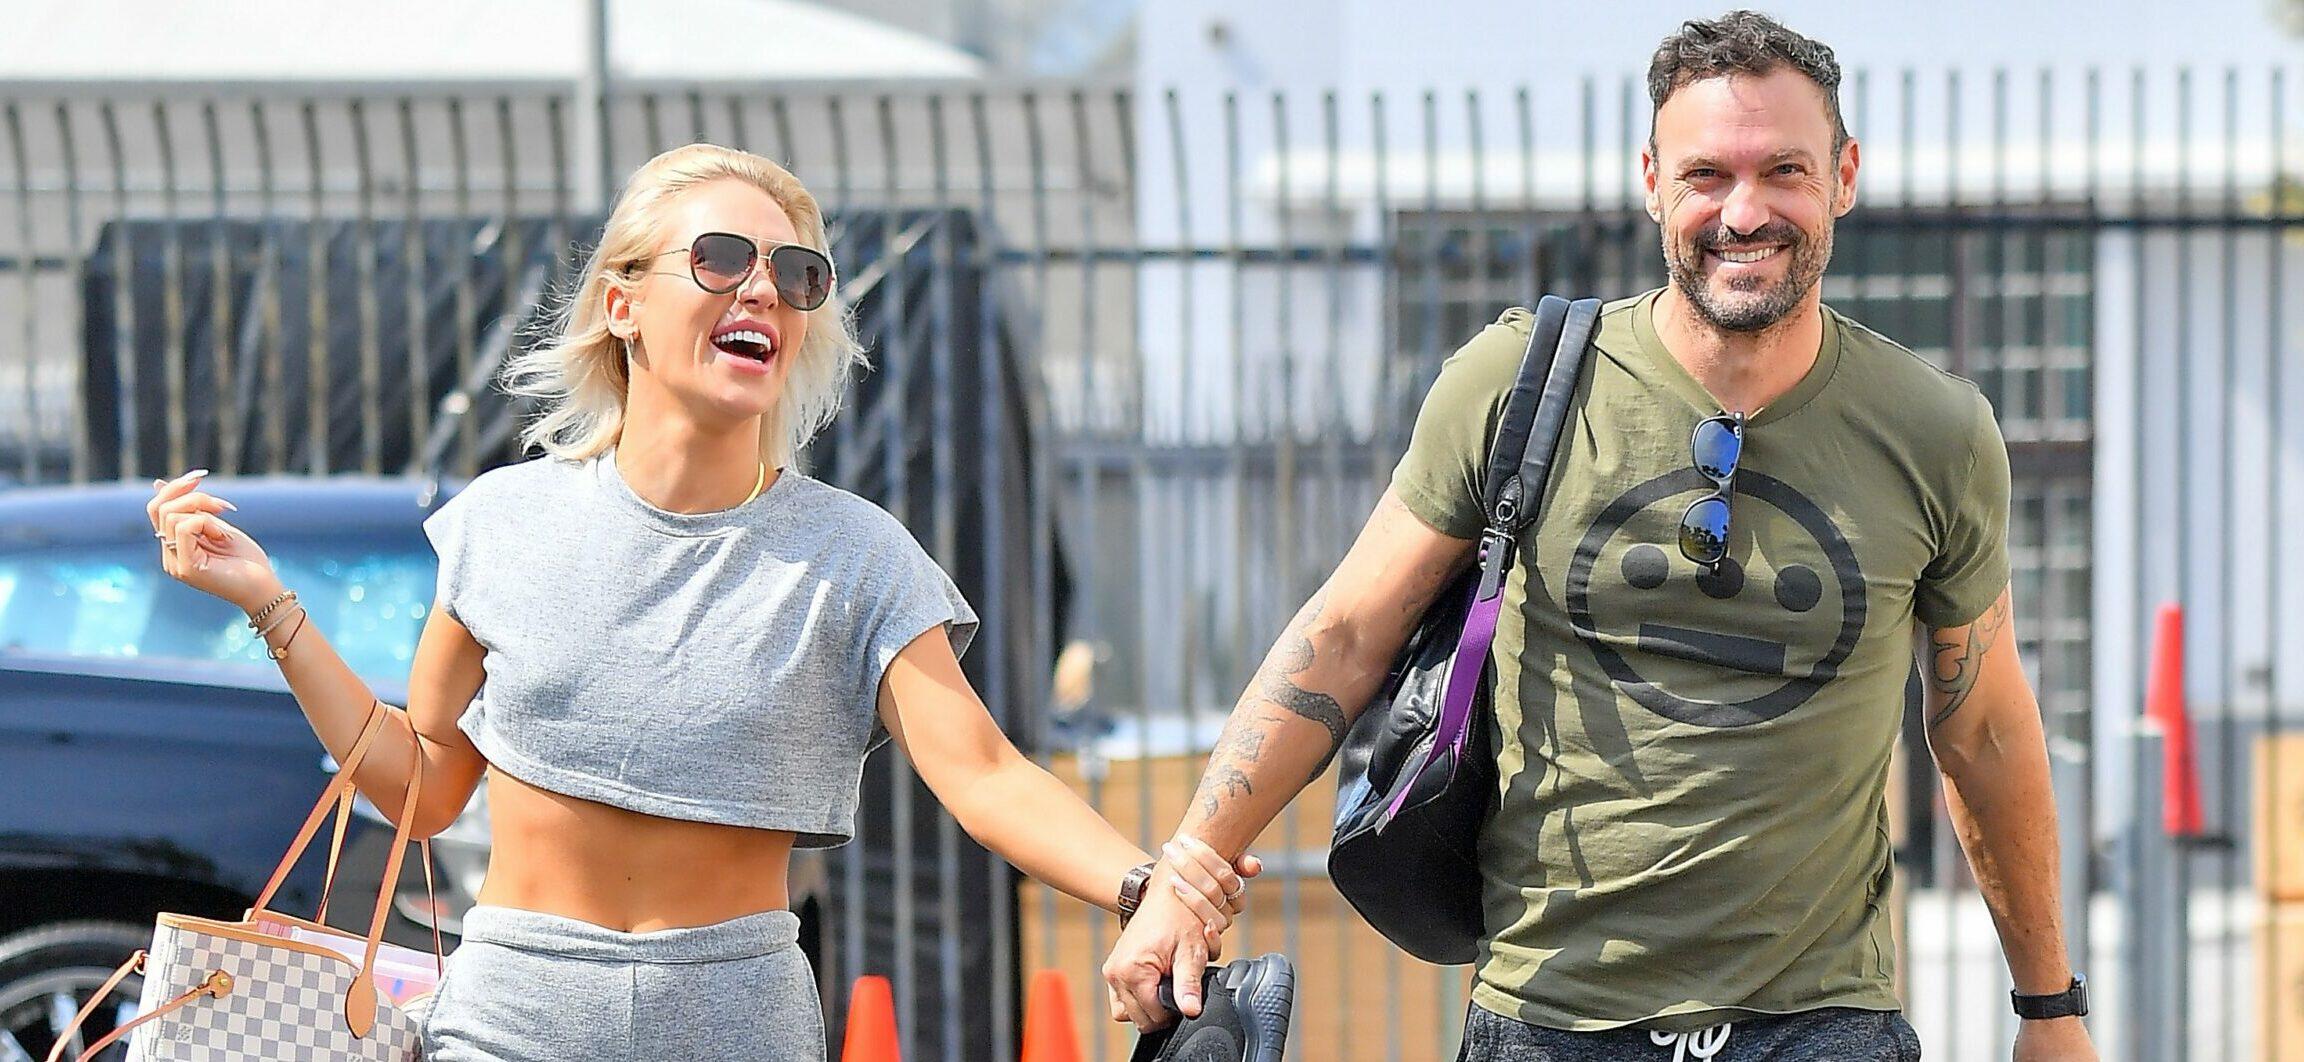 Sharna Burgess and Brian Austin Green on their way to rehearsals for Dancing With The Stars